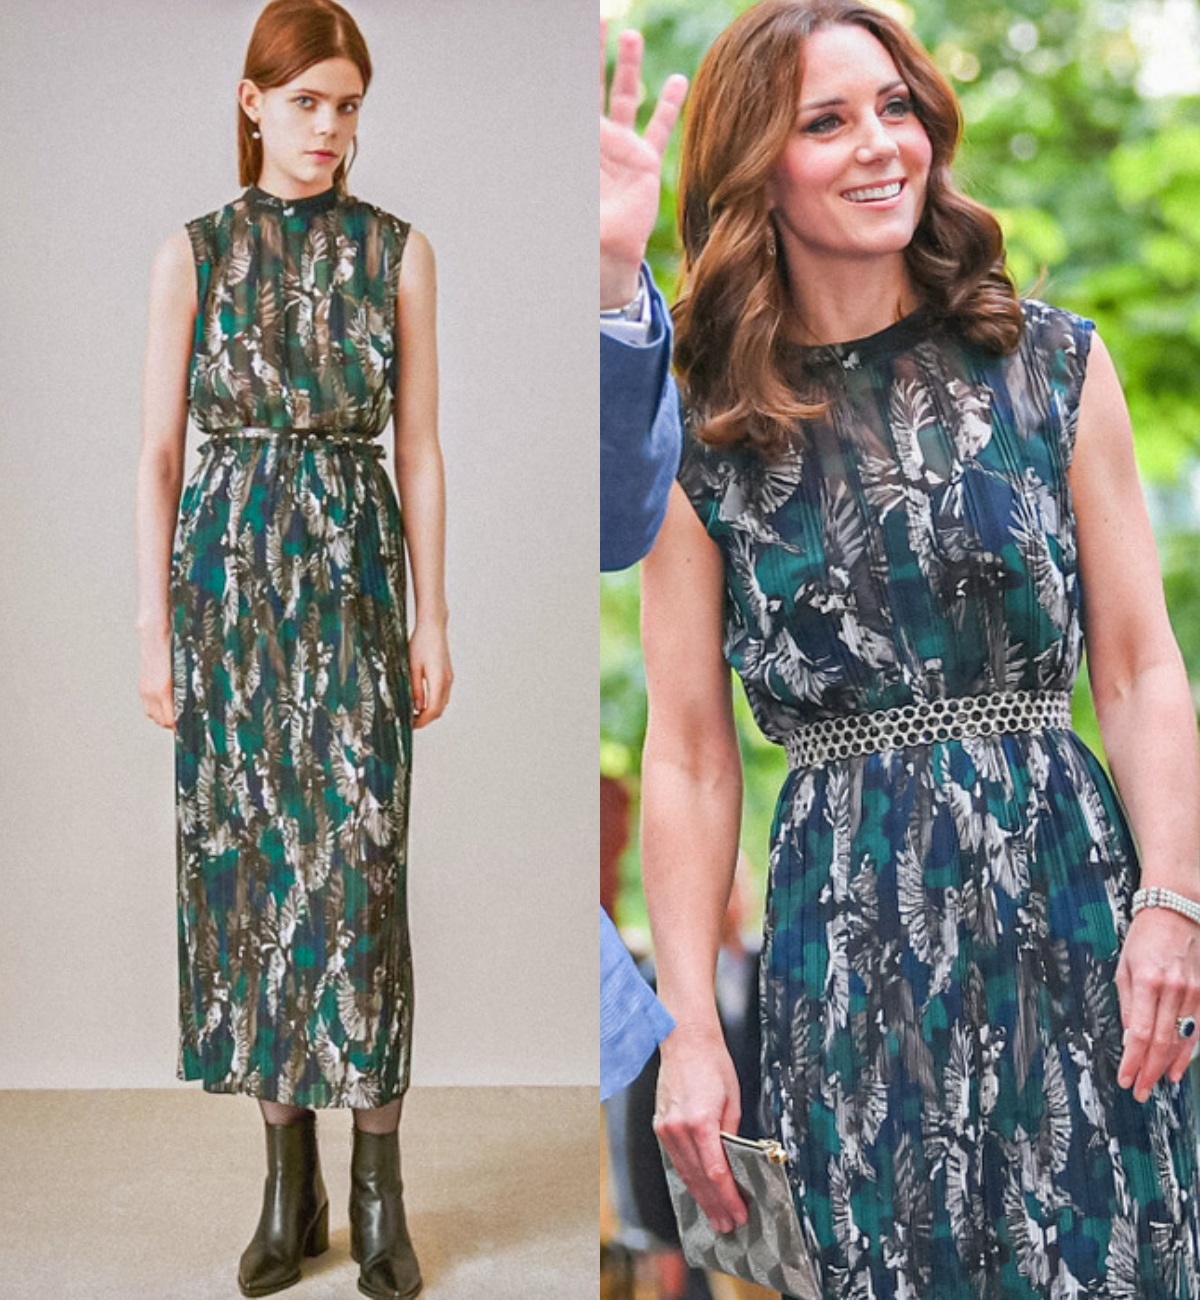 7 times Kate Middleton dresses better than the model, proving the temperament of the Royal Princess - Photo 2.